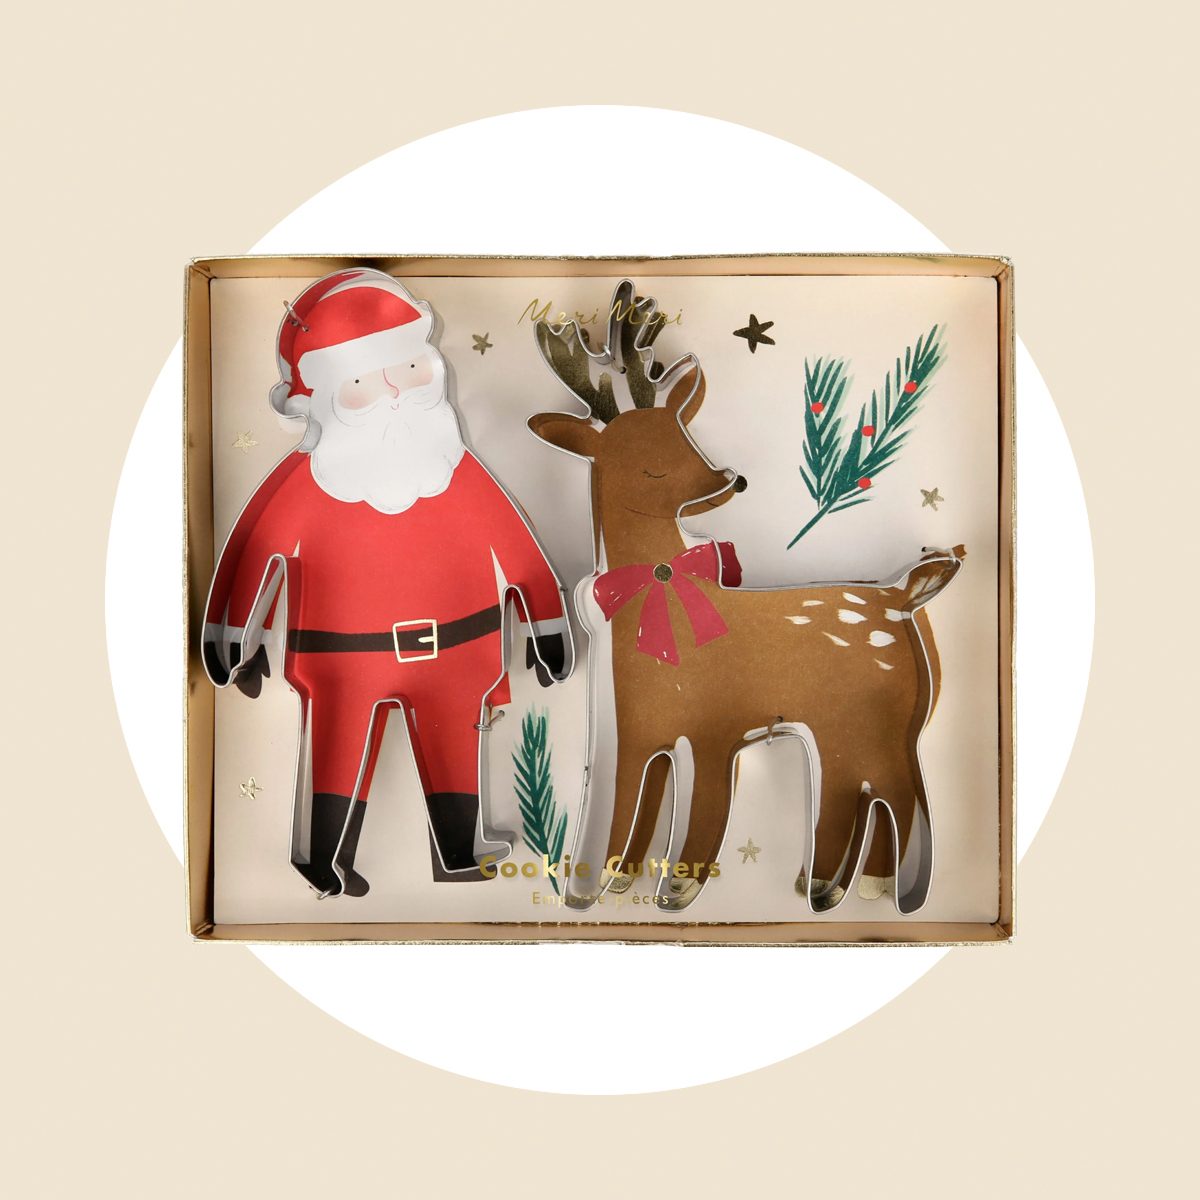 <p>Fill your cookie tray with whimsy, thanks to this adorable <a href="https://merimeri.com/products/santa-and-reindeer-christmas-cookie-cutters" rel="noopener noreferrer">Santa and Rudolph cookie cutter set</a>. This pack of two includes a jolly old Santa and one reindeer. Be sure to make enough reindeer cookies to account for everyone guiding Santa's sleigh. Have you seen these <a href="https://www.tasteofhome.com/collection/cookie-decorating-kits/">cookie decorating kits</a>?</p> <p class="listicle-page__cta-button-shop"><a class="shop-btn" href="https://merimeri.com/products/santa-and-reindeer-christmas-cookie-cutters">Shop Now</a></p>